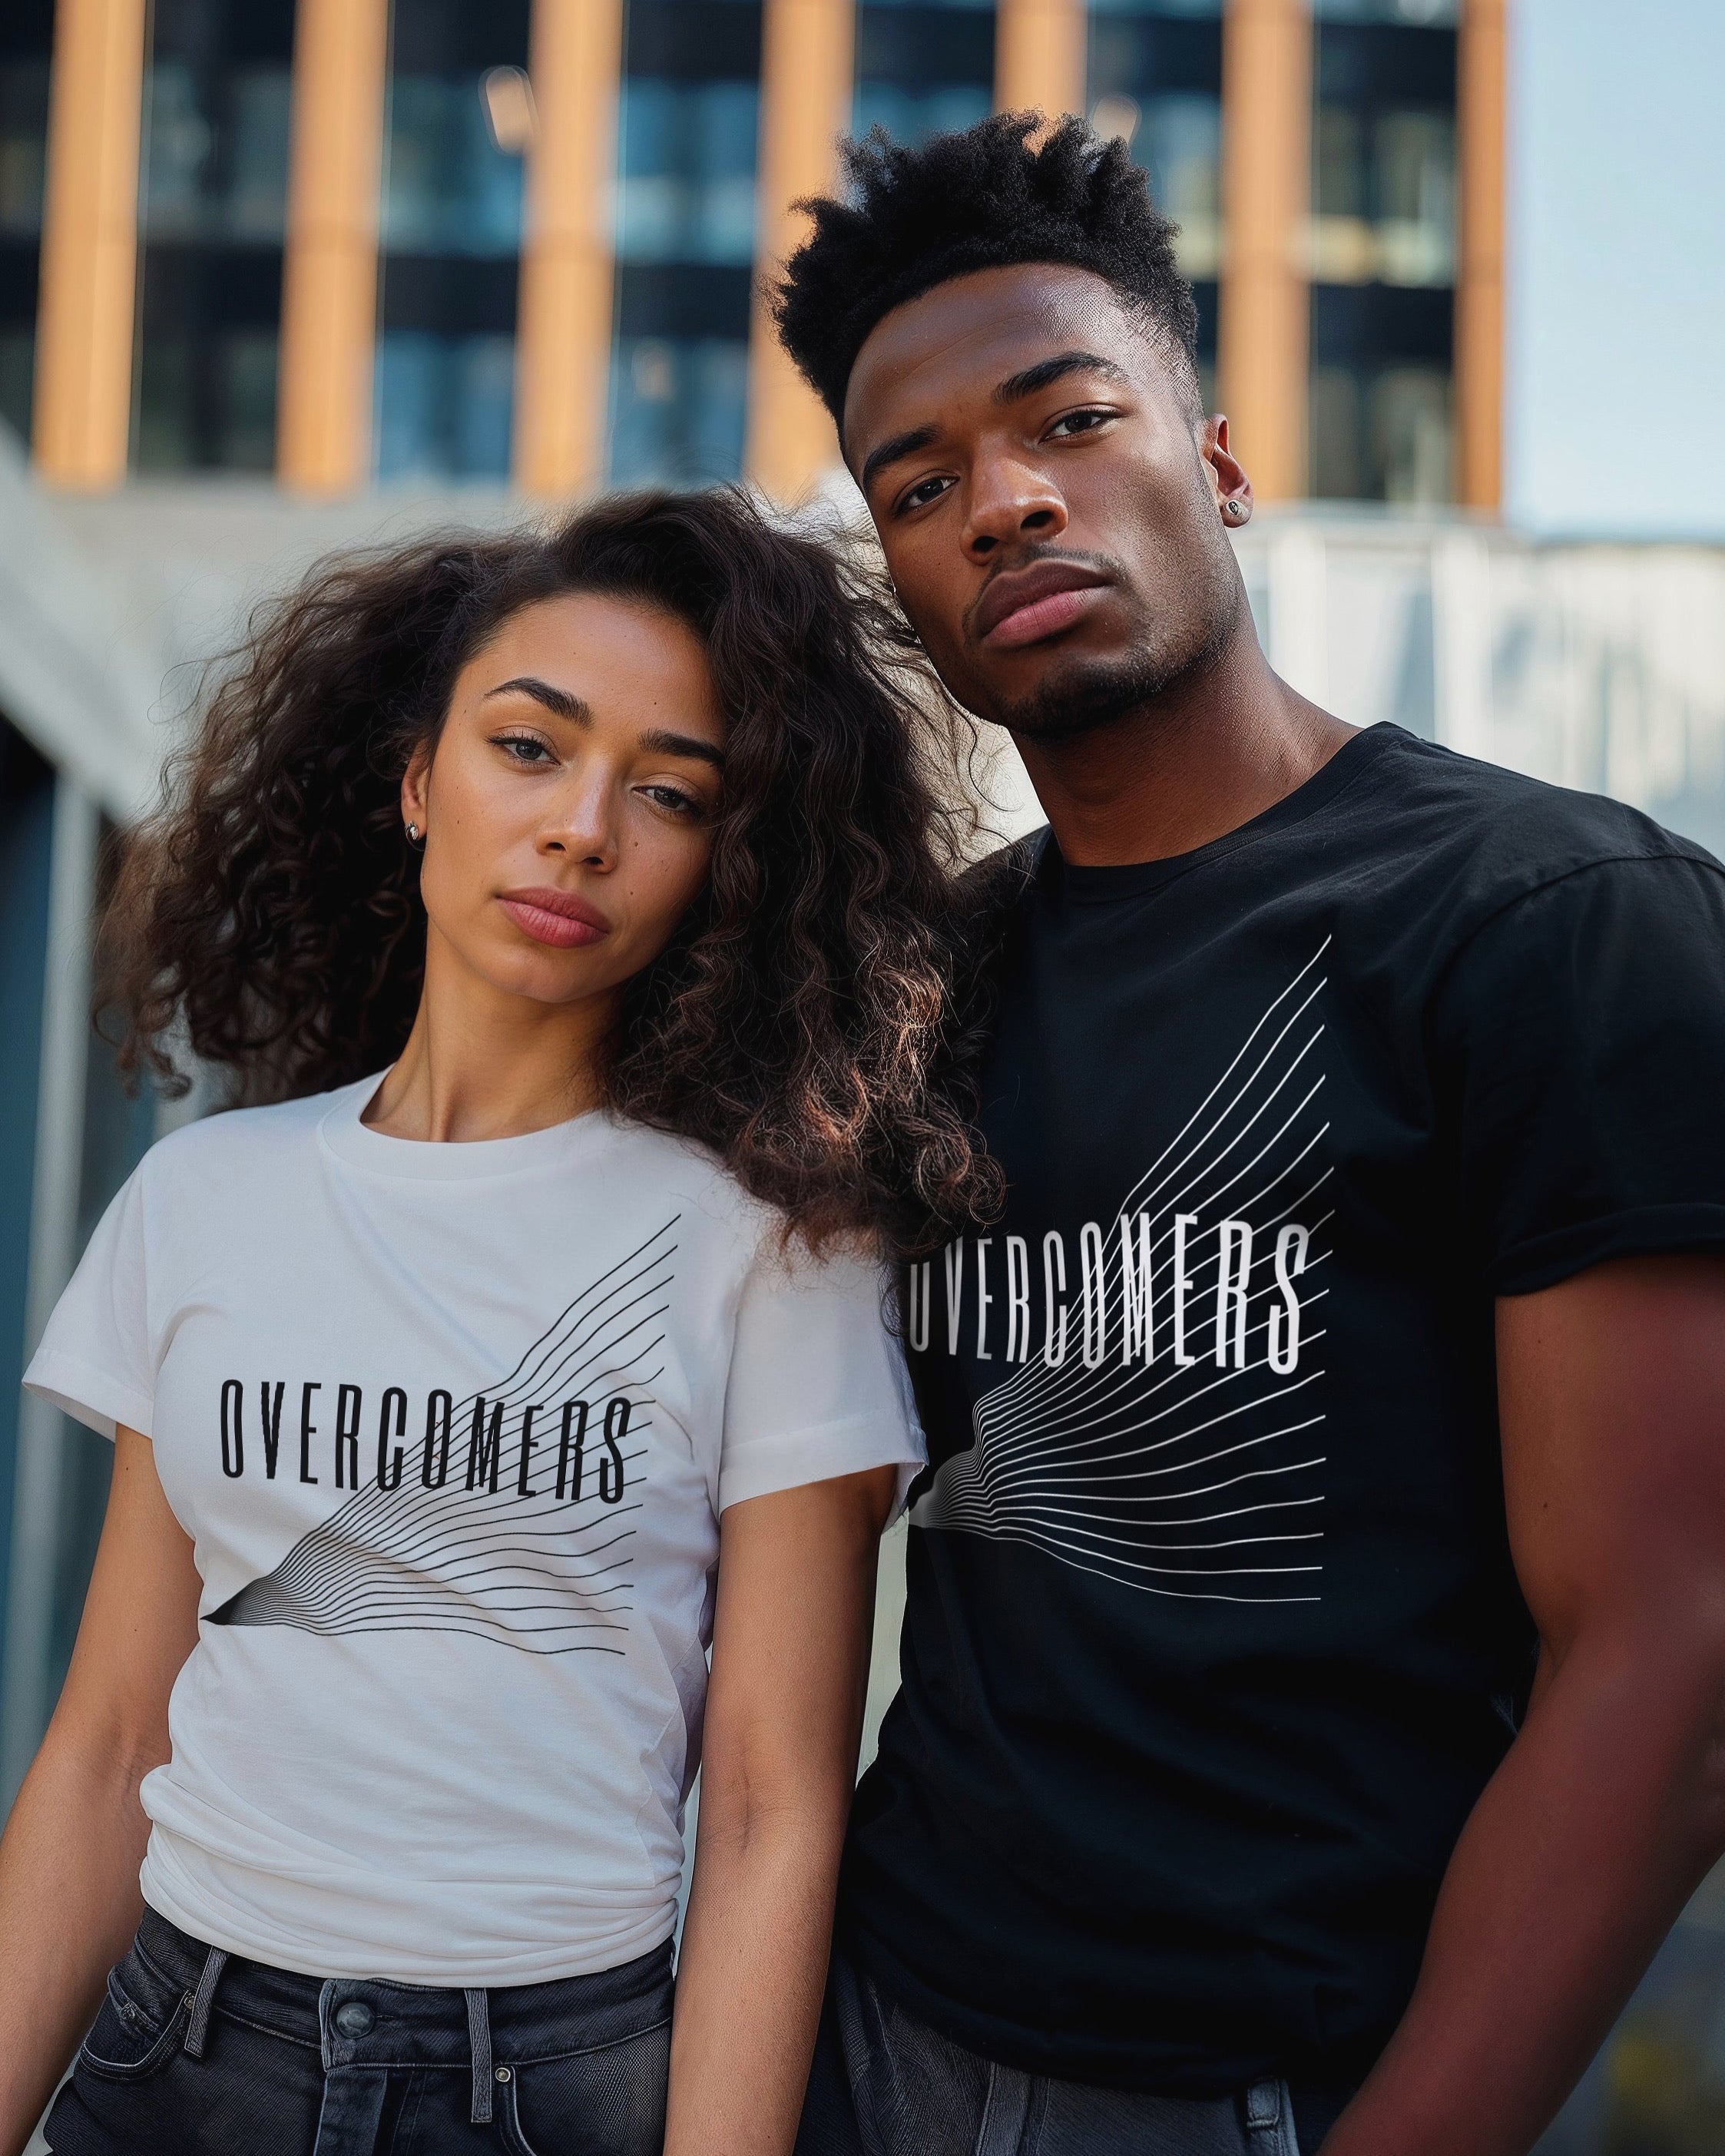 Man wearing black 'Overcomers' collection t-shirt standing next to woman wearing white 'Overcomers' collection t-shirt 